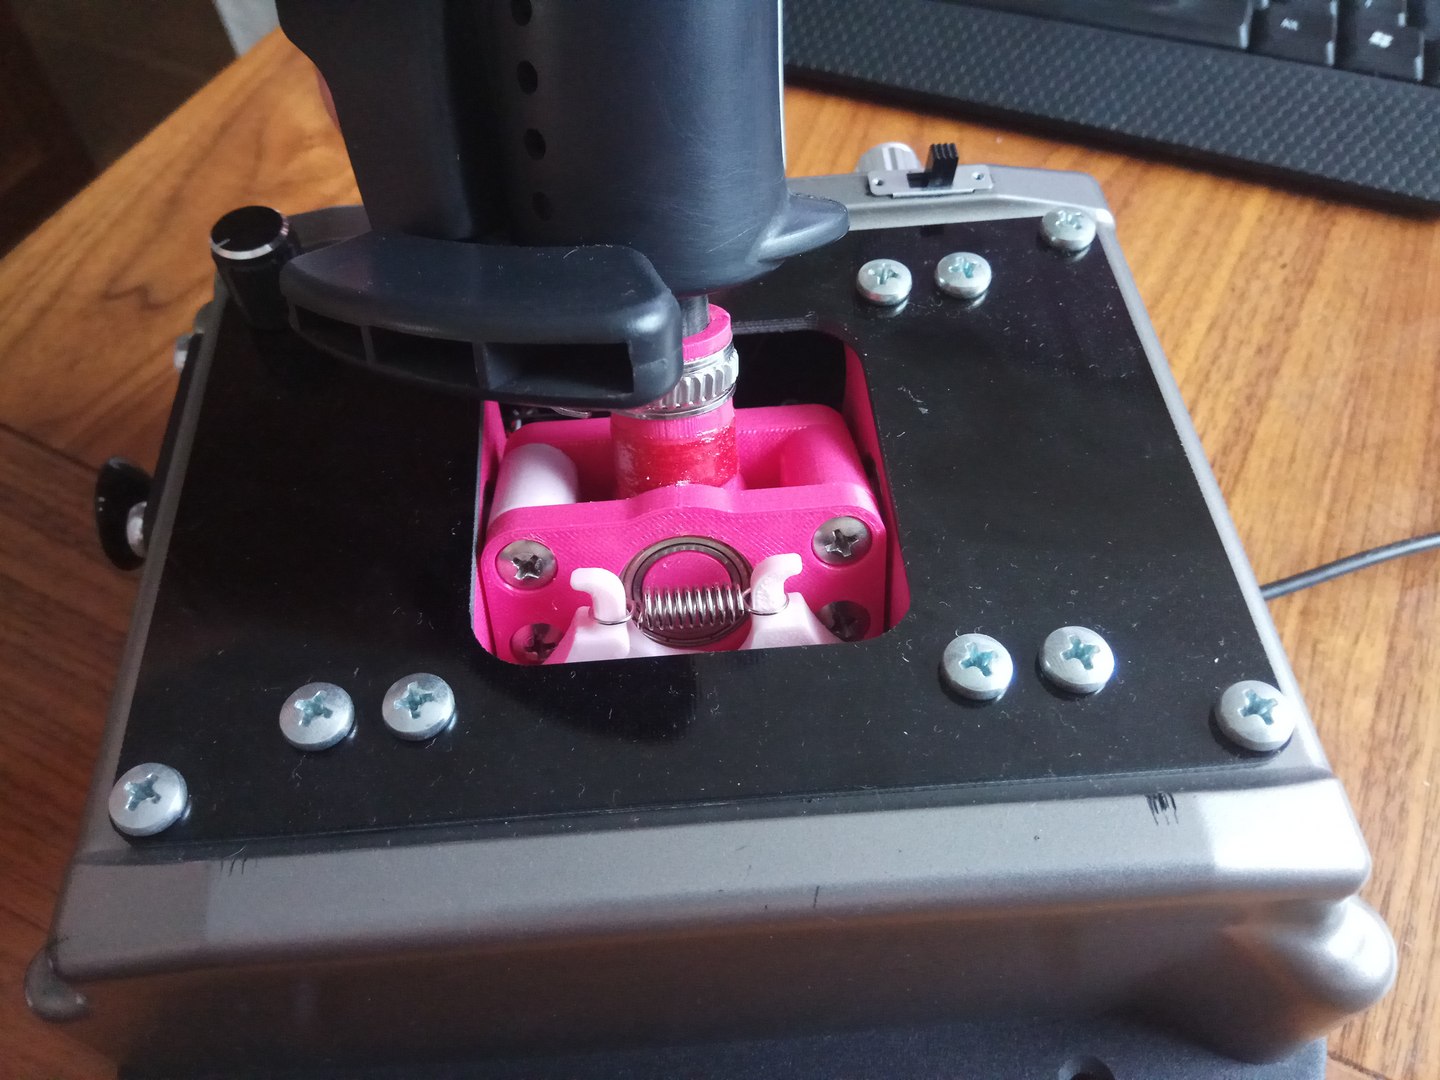 3D Printed gimbal - PC Hardware and Related Software - ED Forums